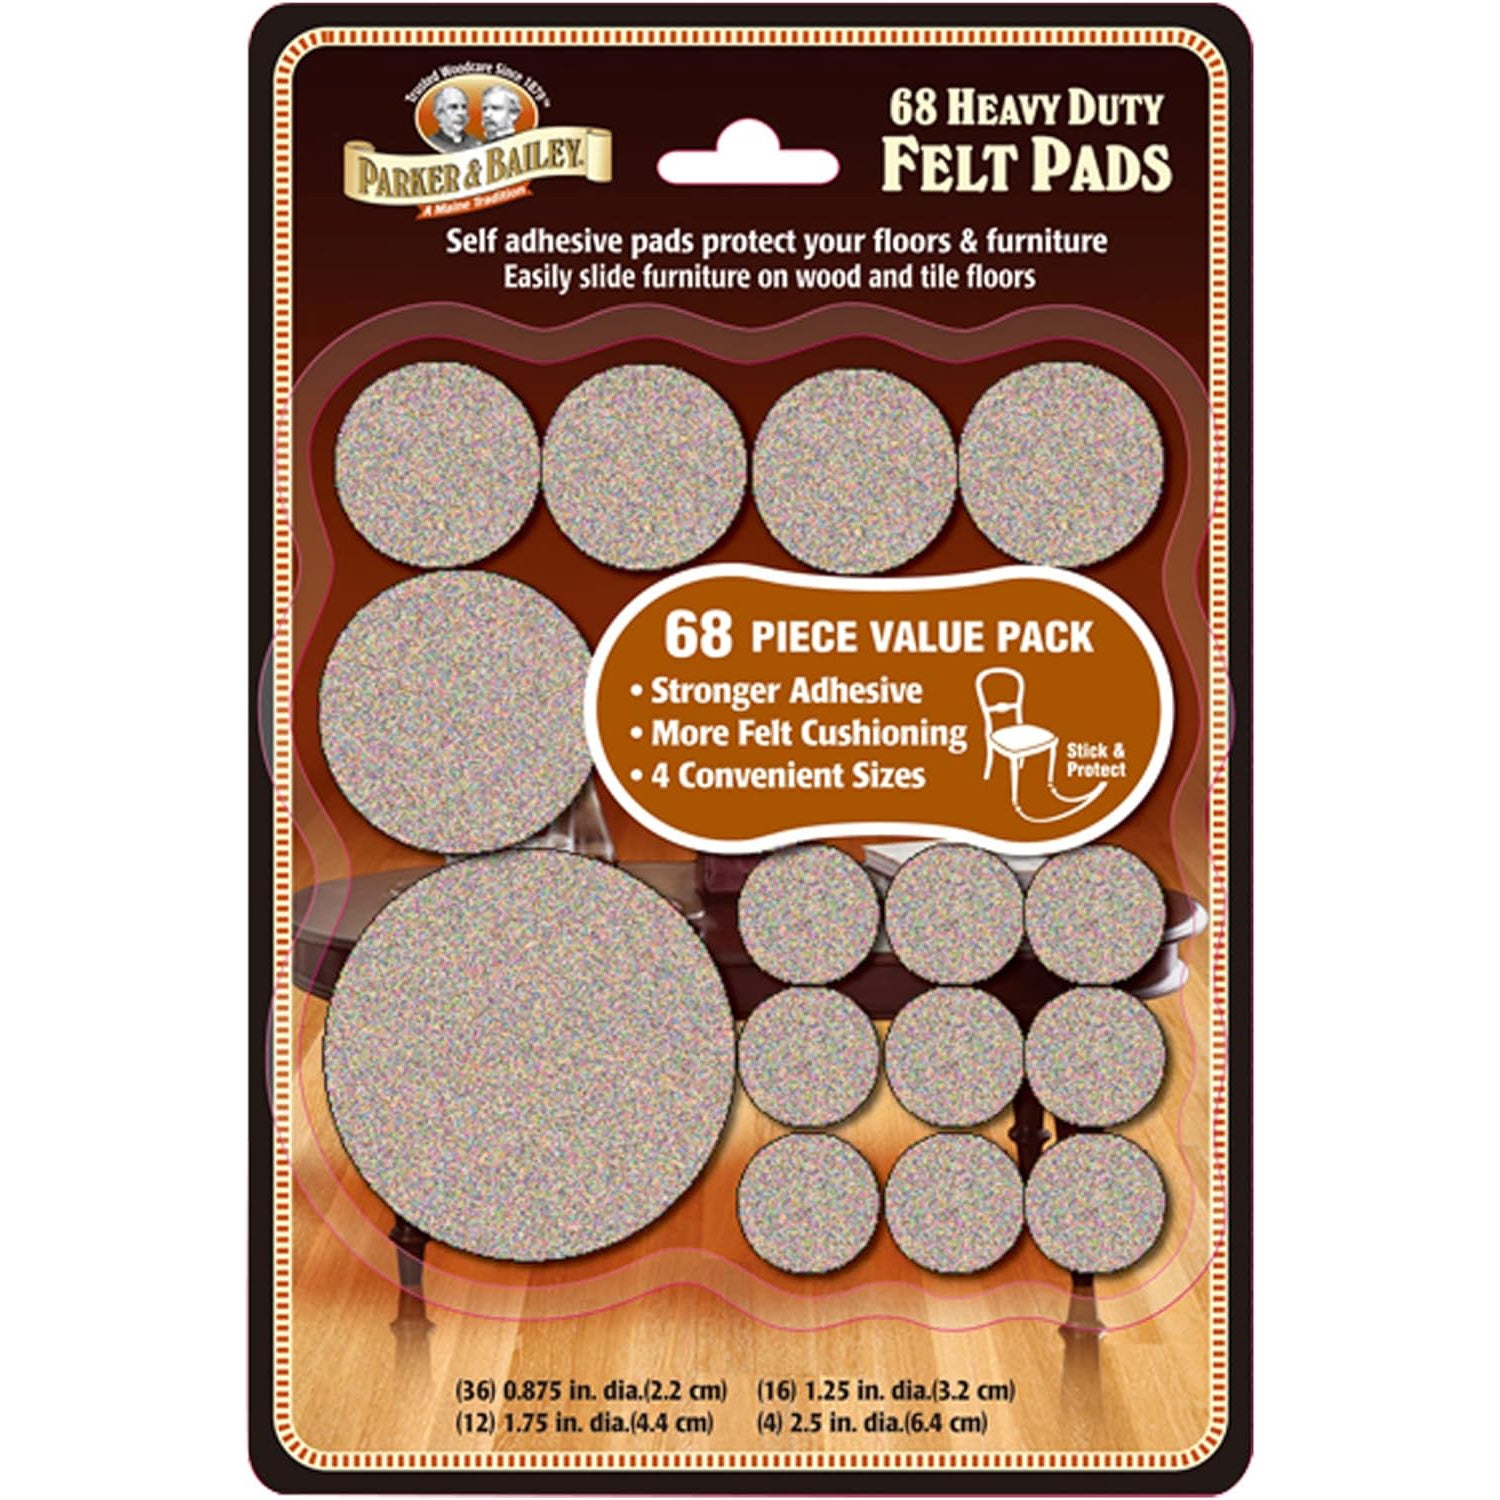 Parker & Bailey Heavy Duty Felt Pads Kit – Assorted Sizes – Value Pack of 68